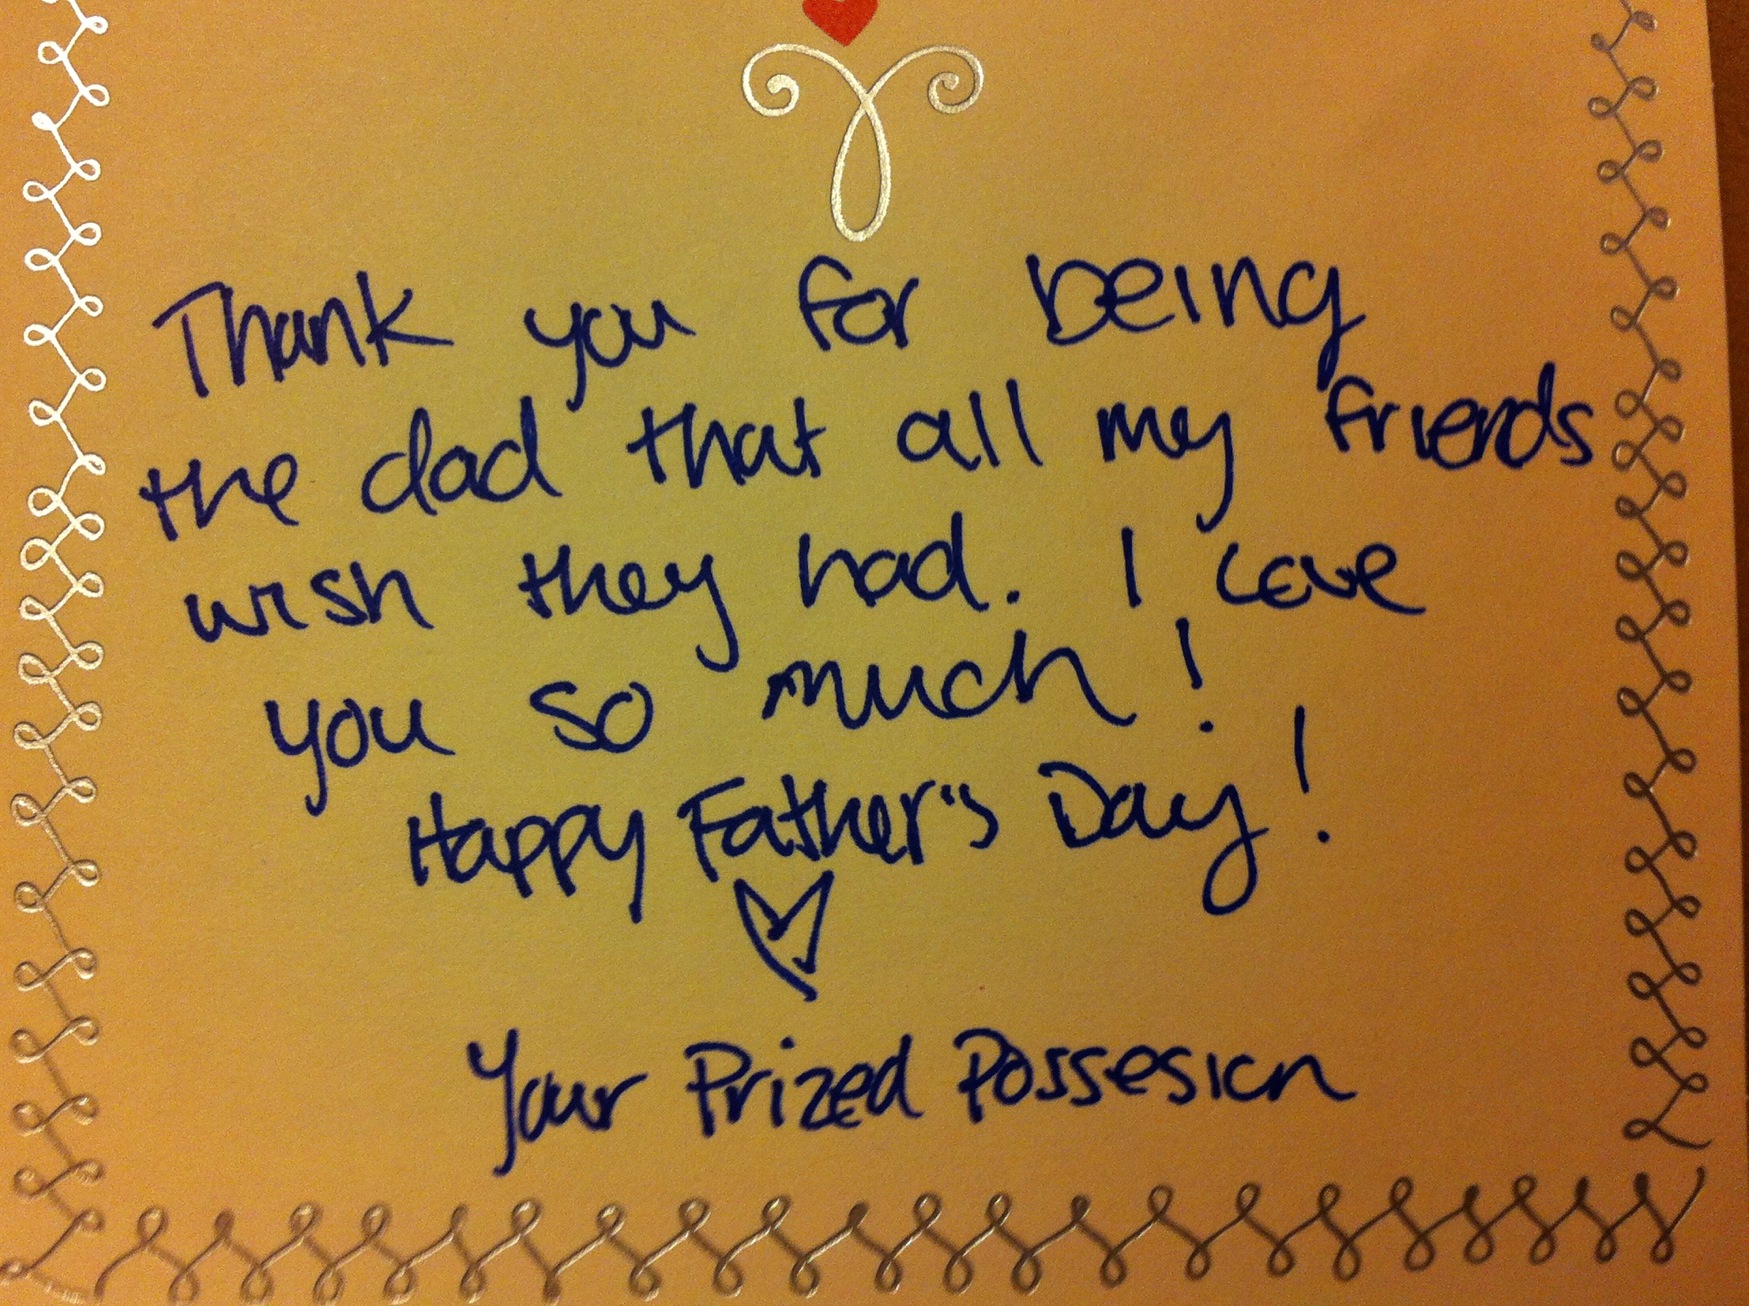 Happy Fathers Day Quotes In Spanishfor Husband.